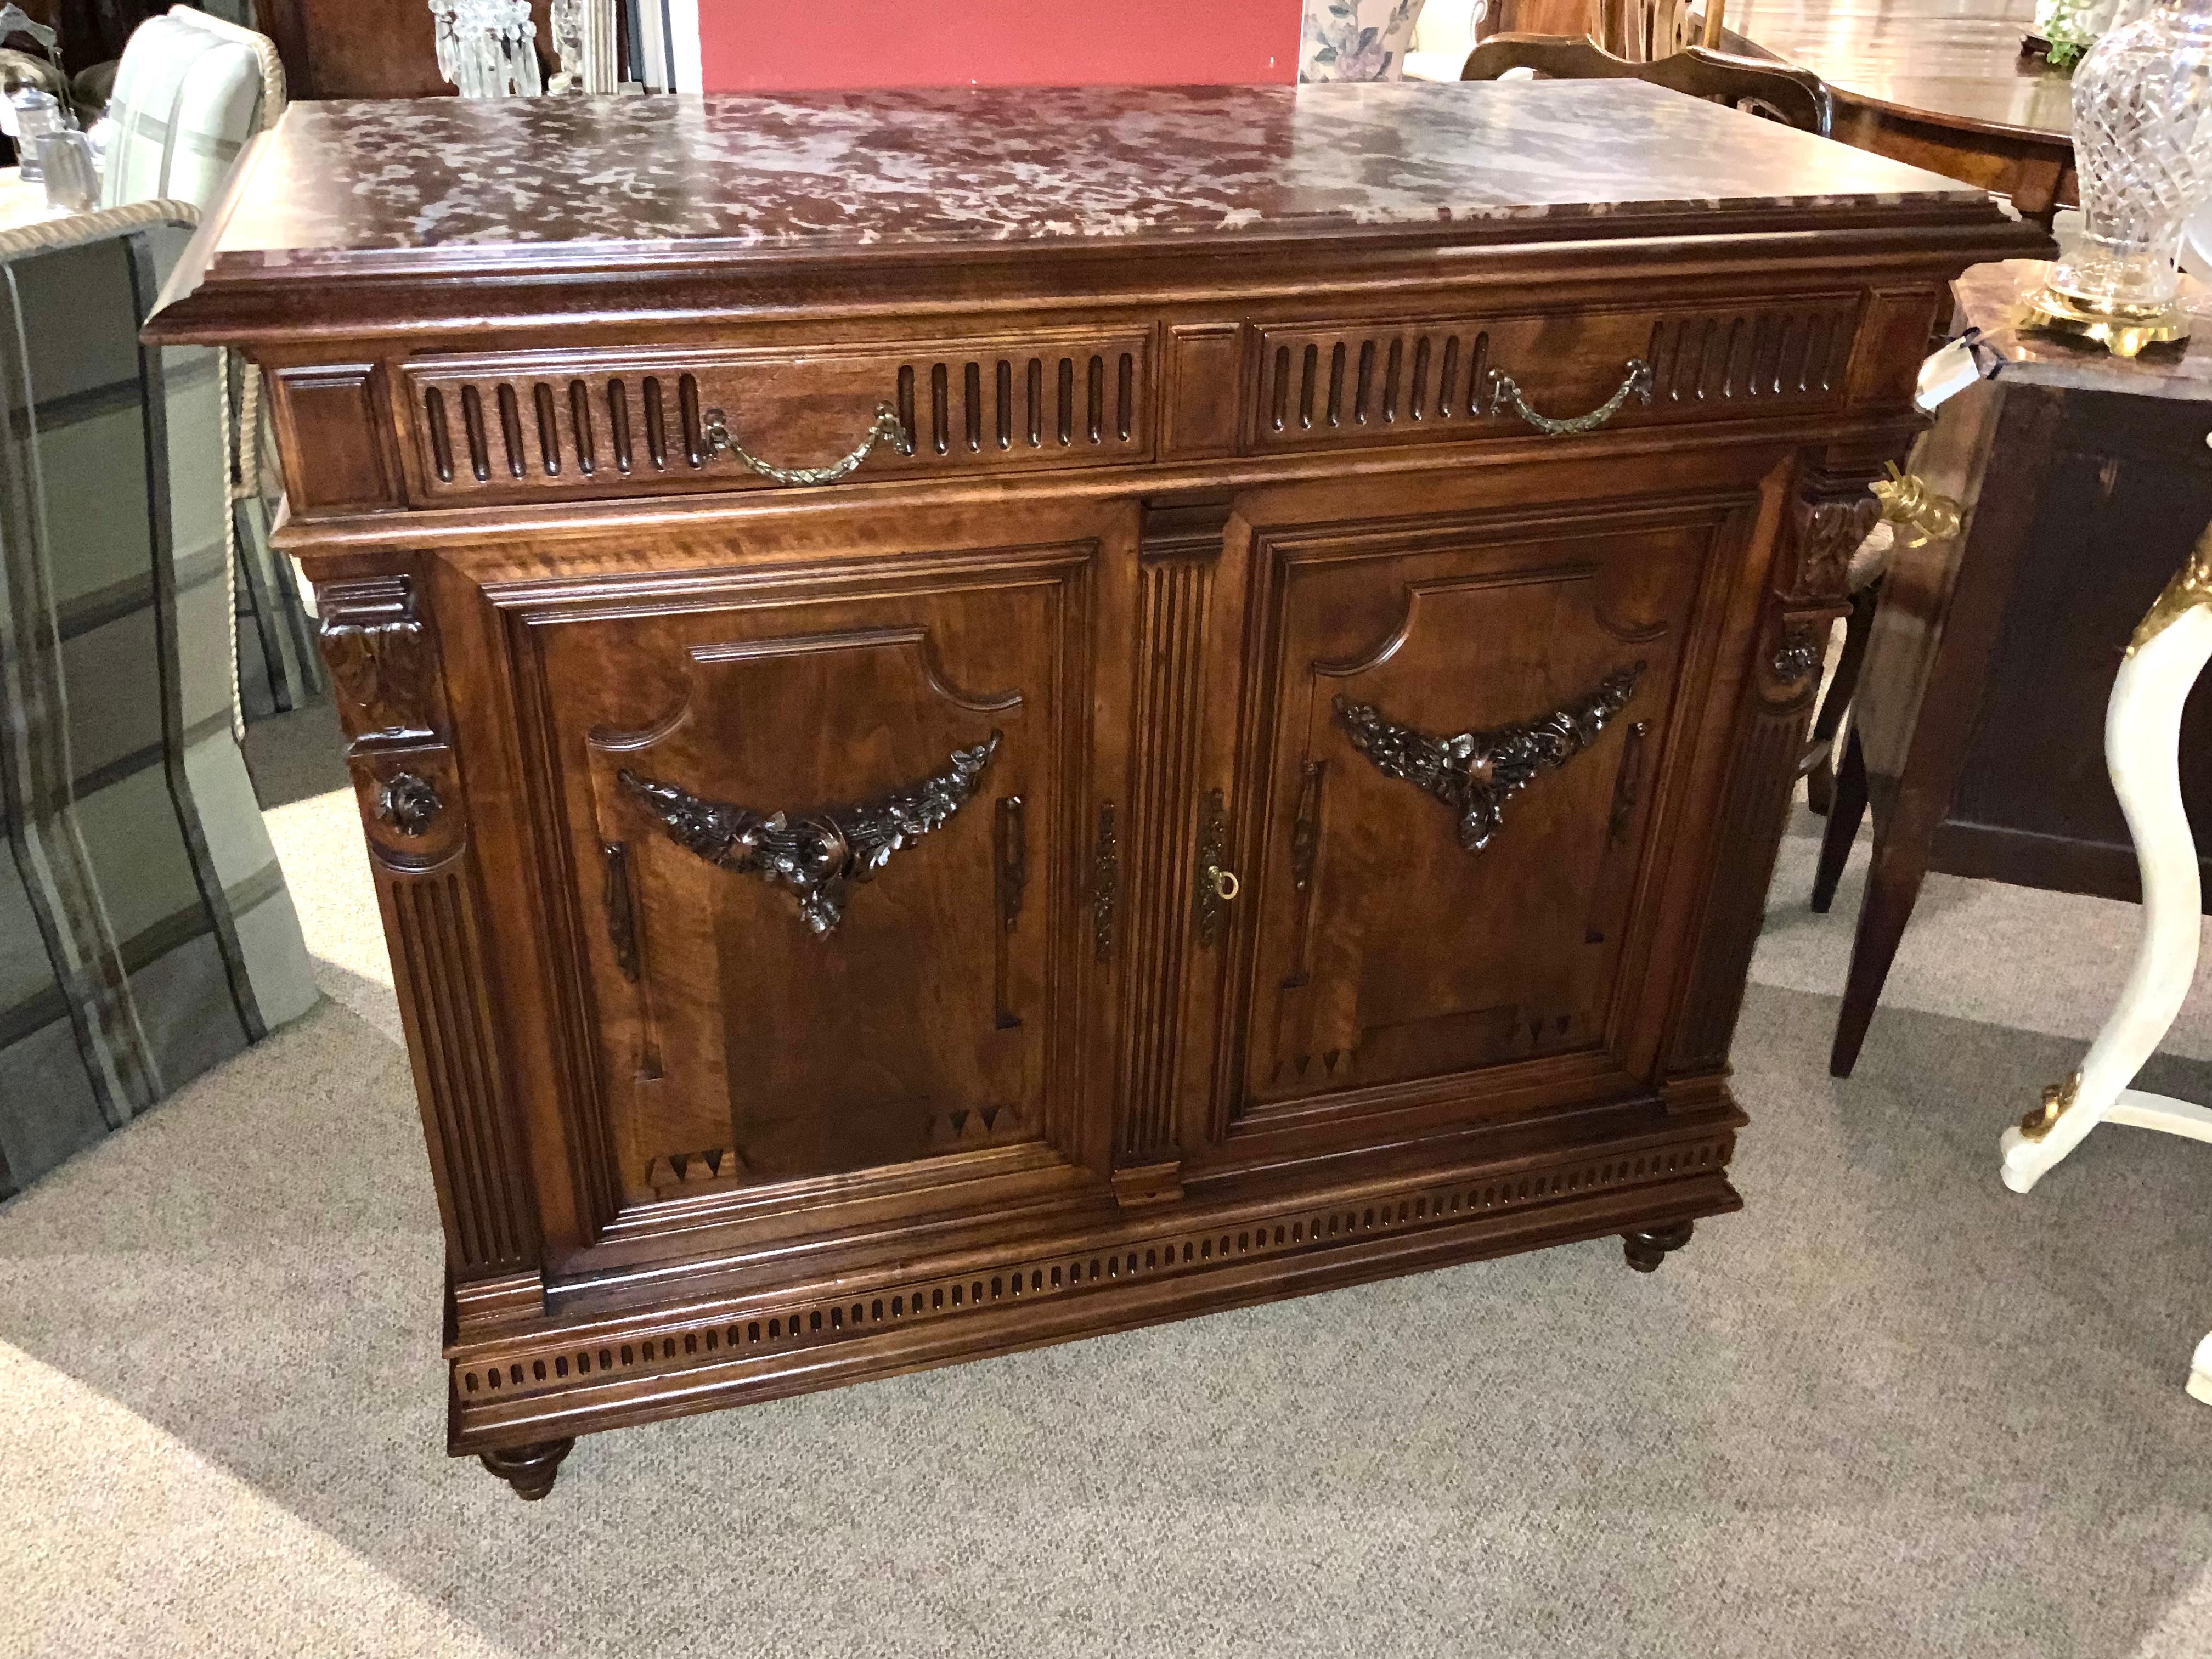 Louis XV-style in a beautiful dark walnut wood makes this piece 
Exceptional! It is very desirable from the standpoint of being both handsome
And useful with great storage. It has a rouge marble top without restorations 
Which makes it great for